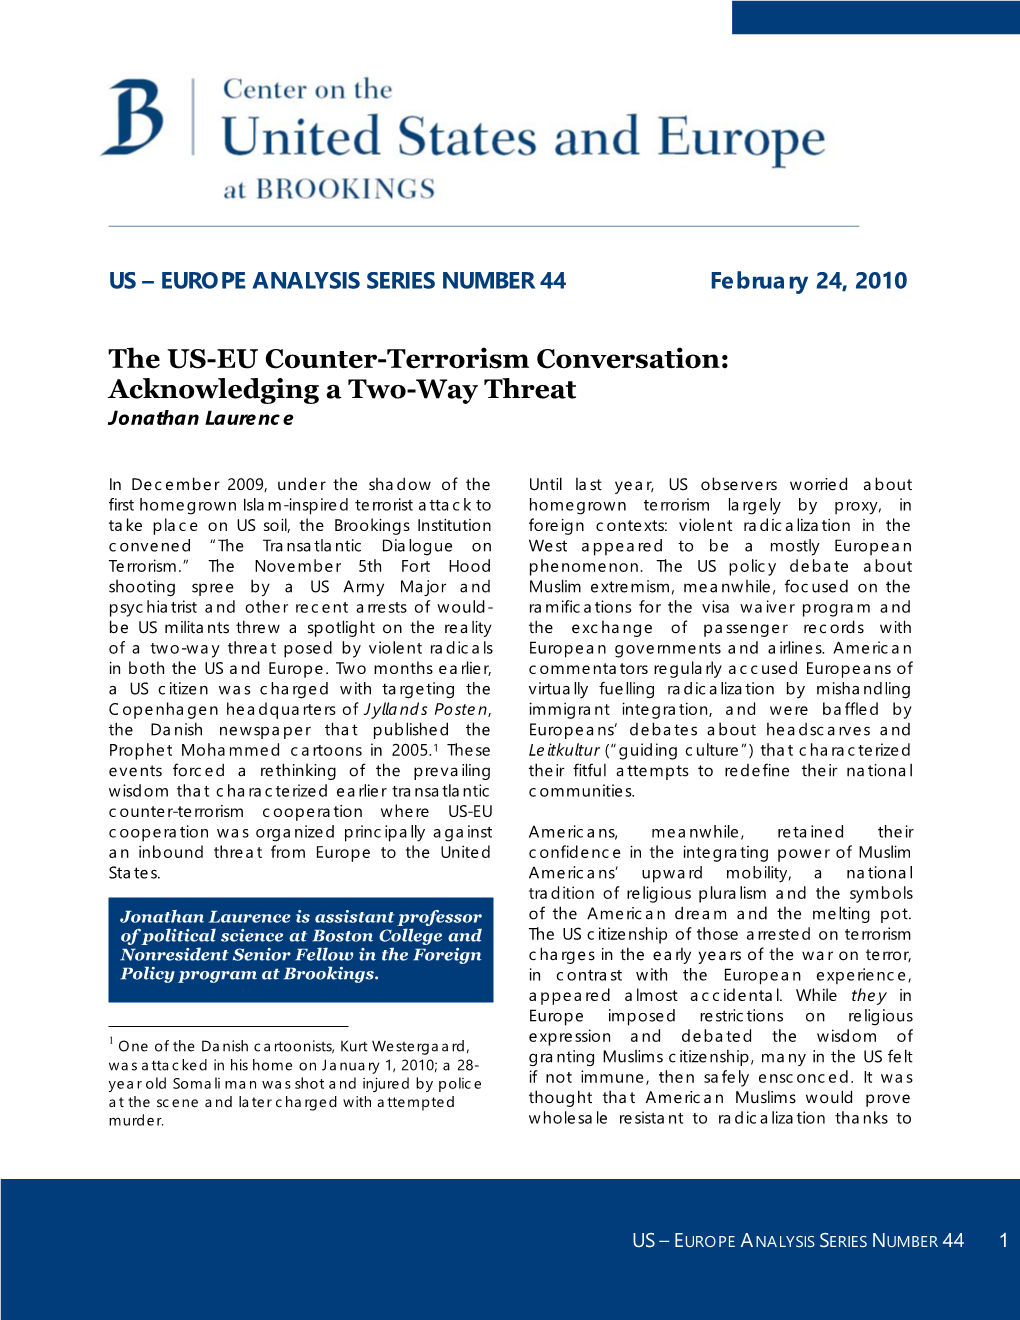 The US-EU Counter-Terrorism Conversation: Acknowledging a Two-Way Threat Jonathan Laurence